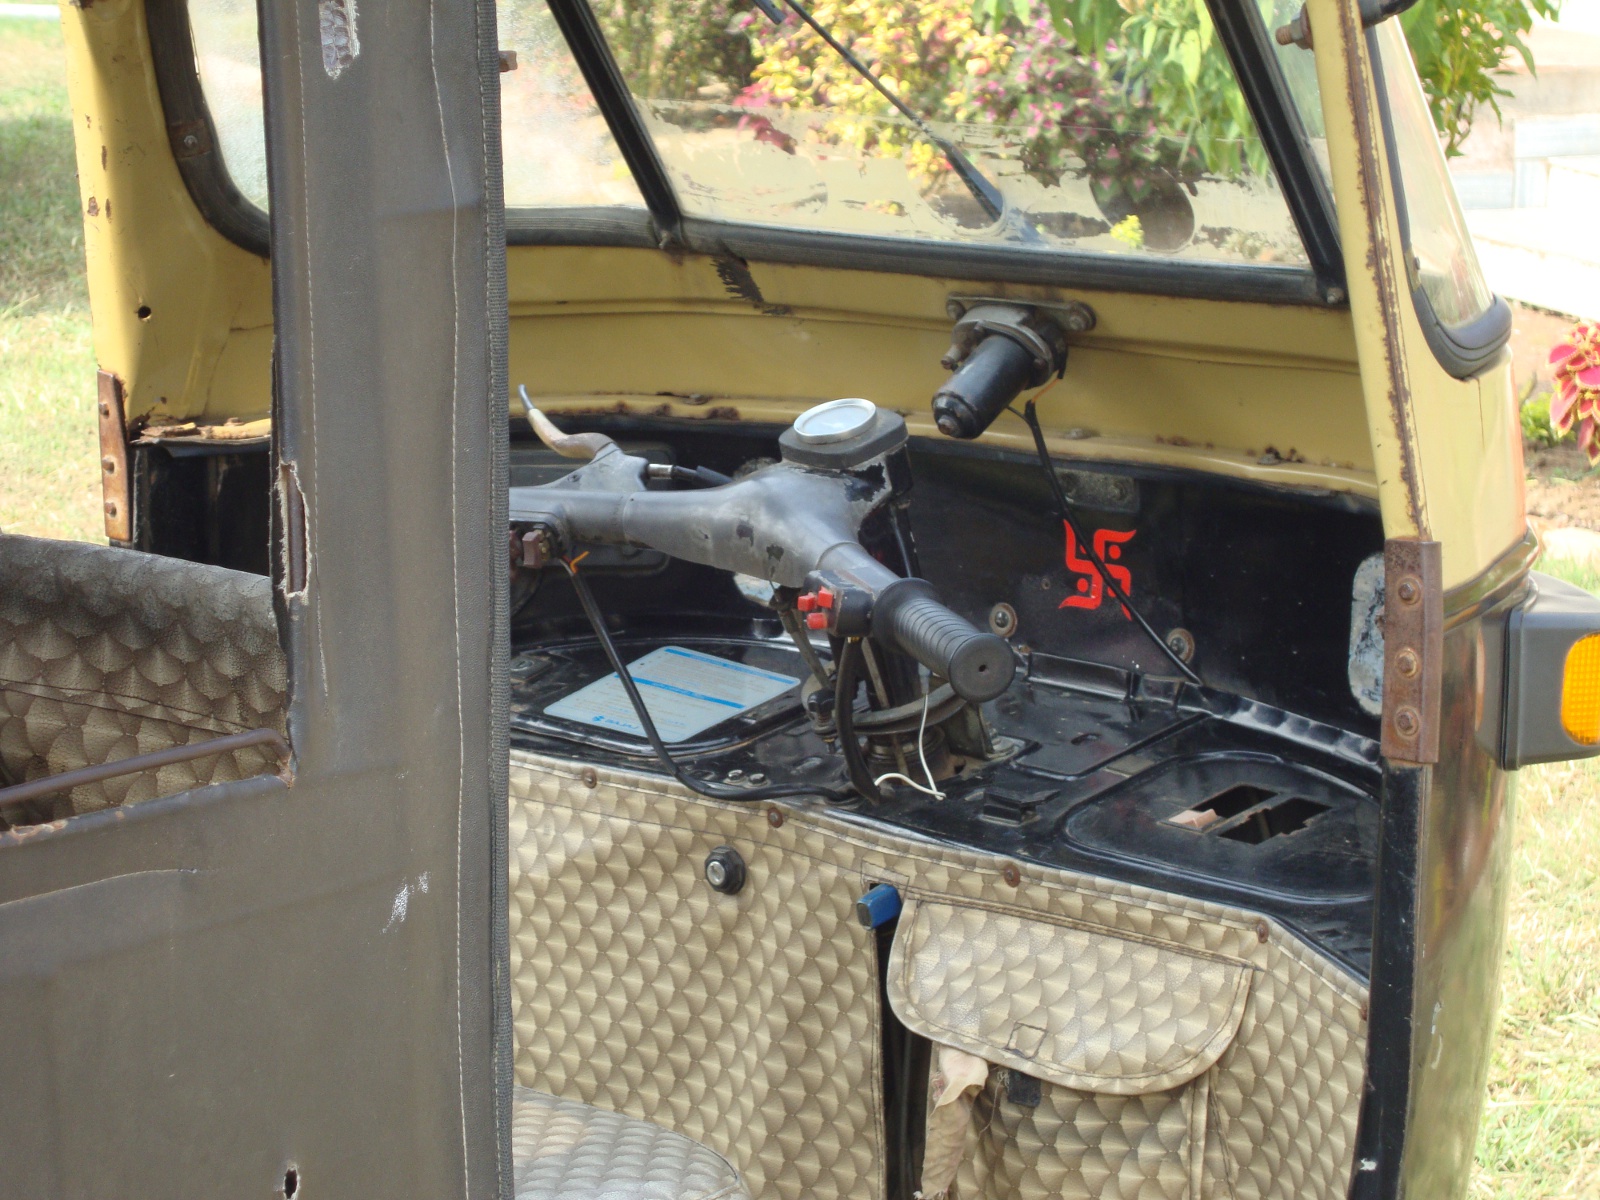 Interior of an auto-rickshaw, showing its scooter-style handlebars.